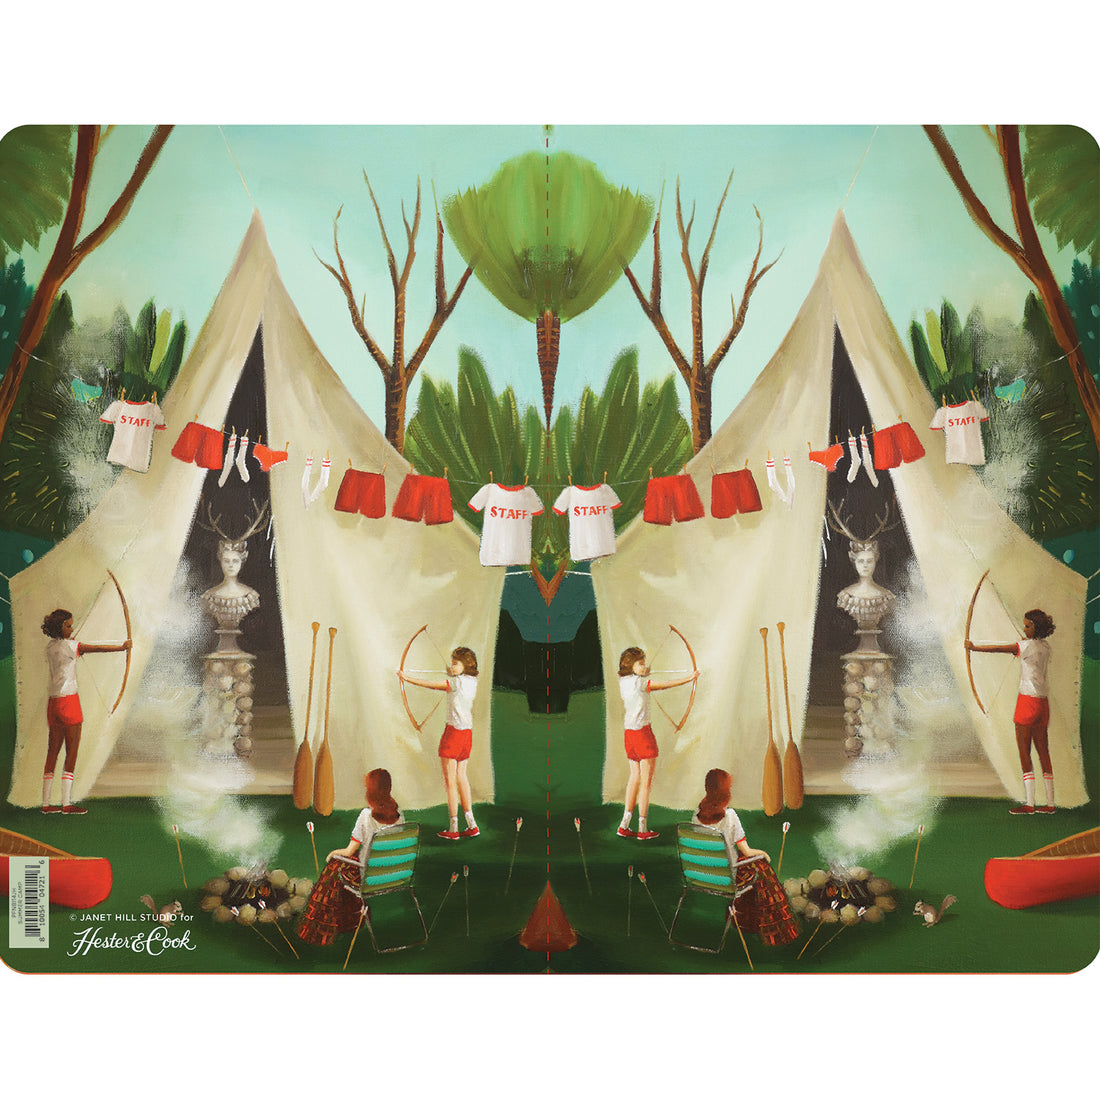 The open back and front covers of the Summer Camp Notebook features the same artwork mirrored on the front and back. 